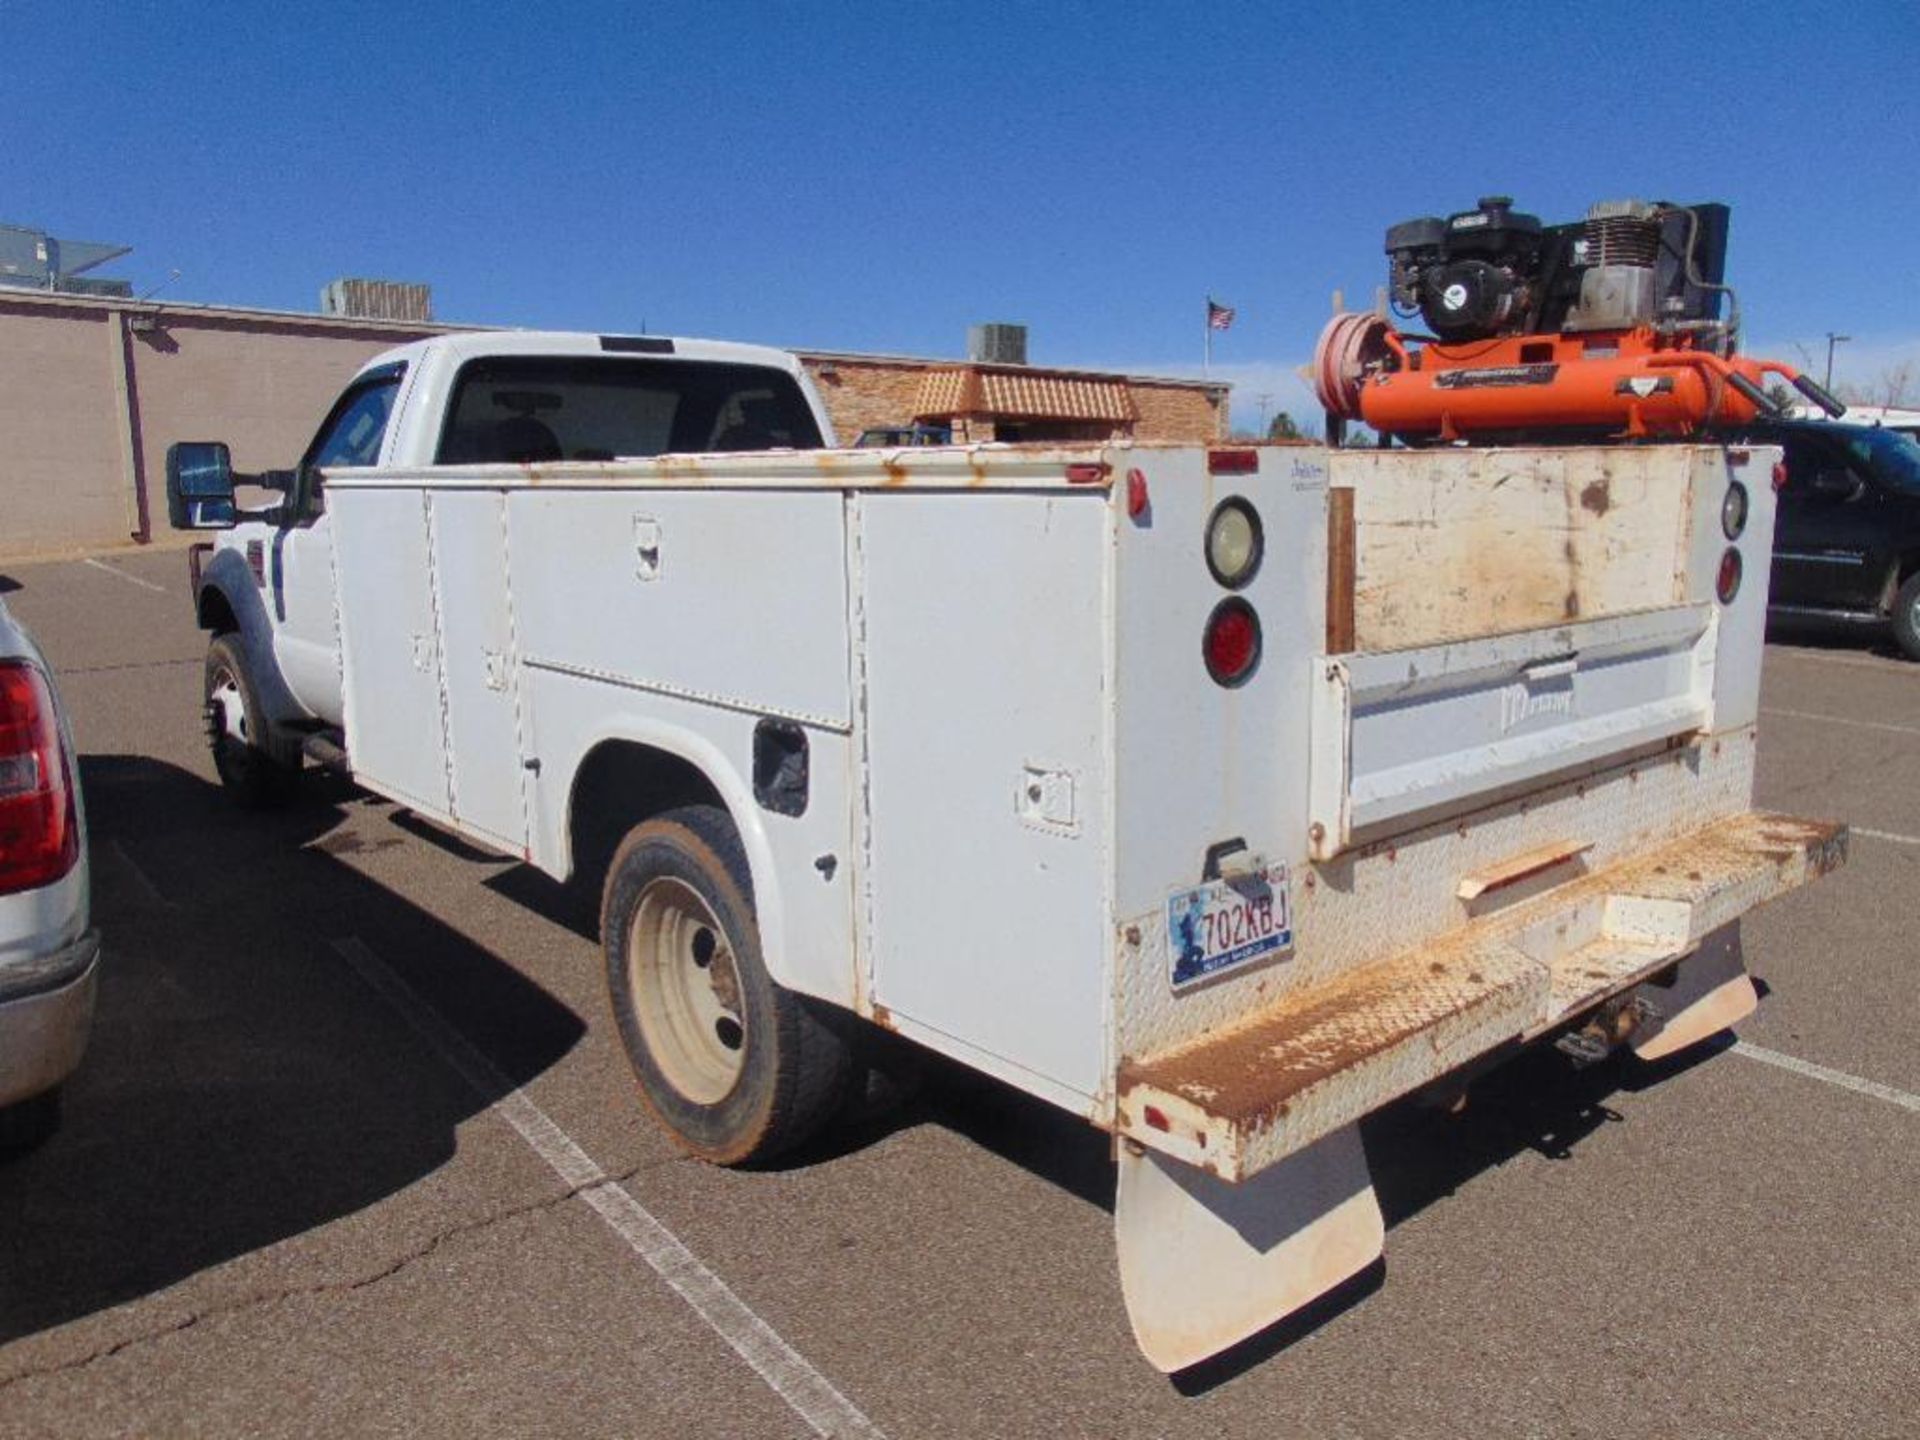 2008 Ford F450 Service Truck s/n 1fdxf46r88eb08550,pwr stroke eng,auto trans, winch, air compressor, - Image 3 of 4